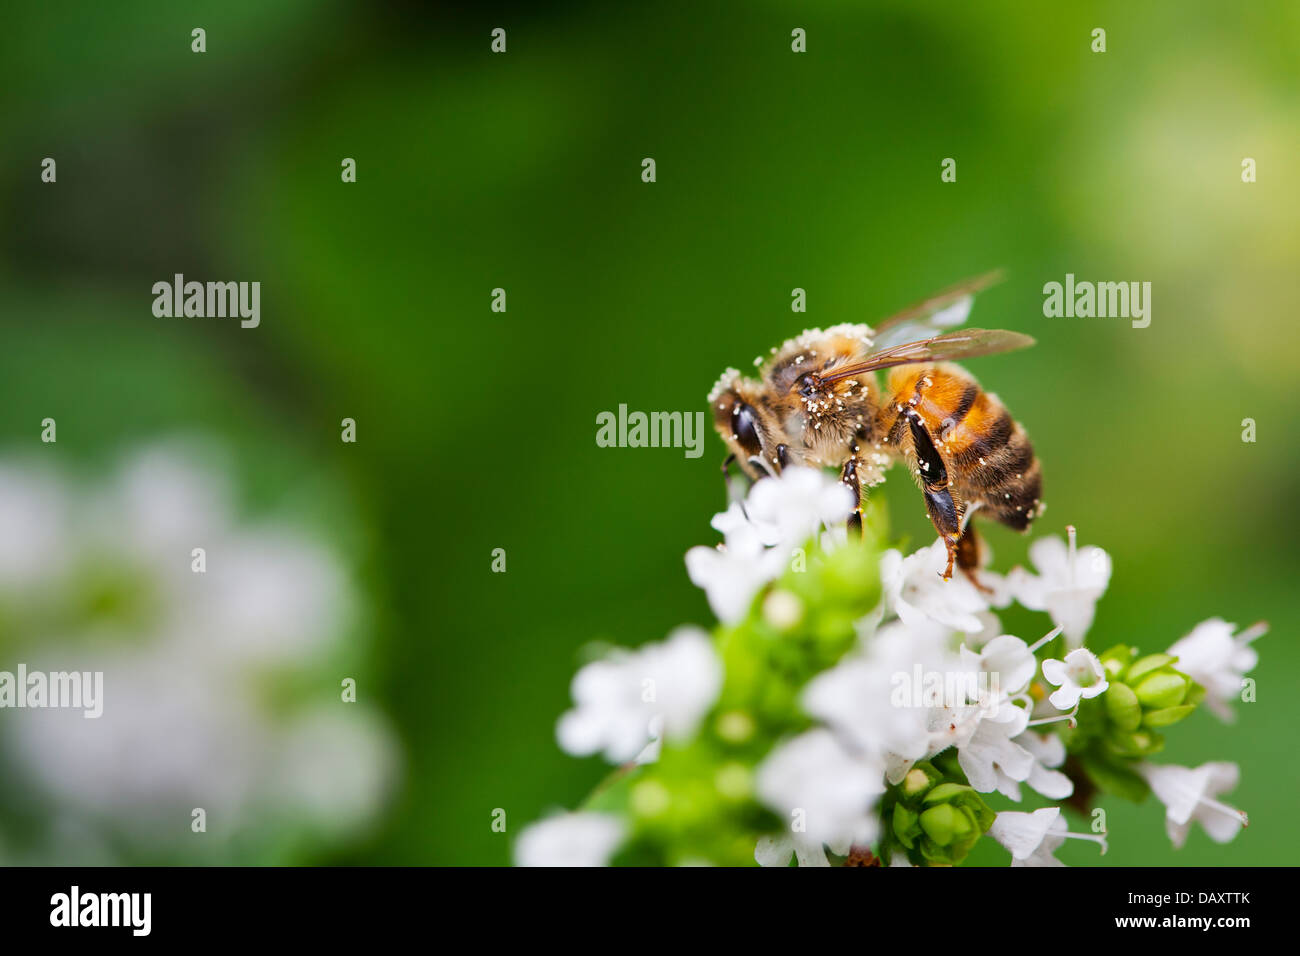 Close-up of a Honey Bee sitting on a white flower in a domestic garden. Stock Photo